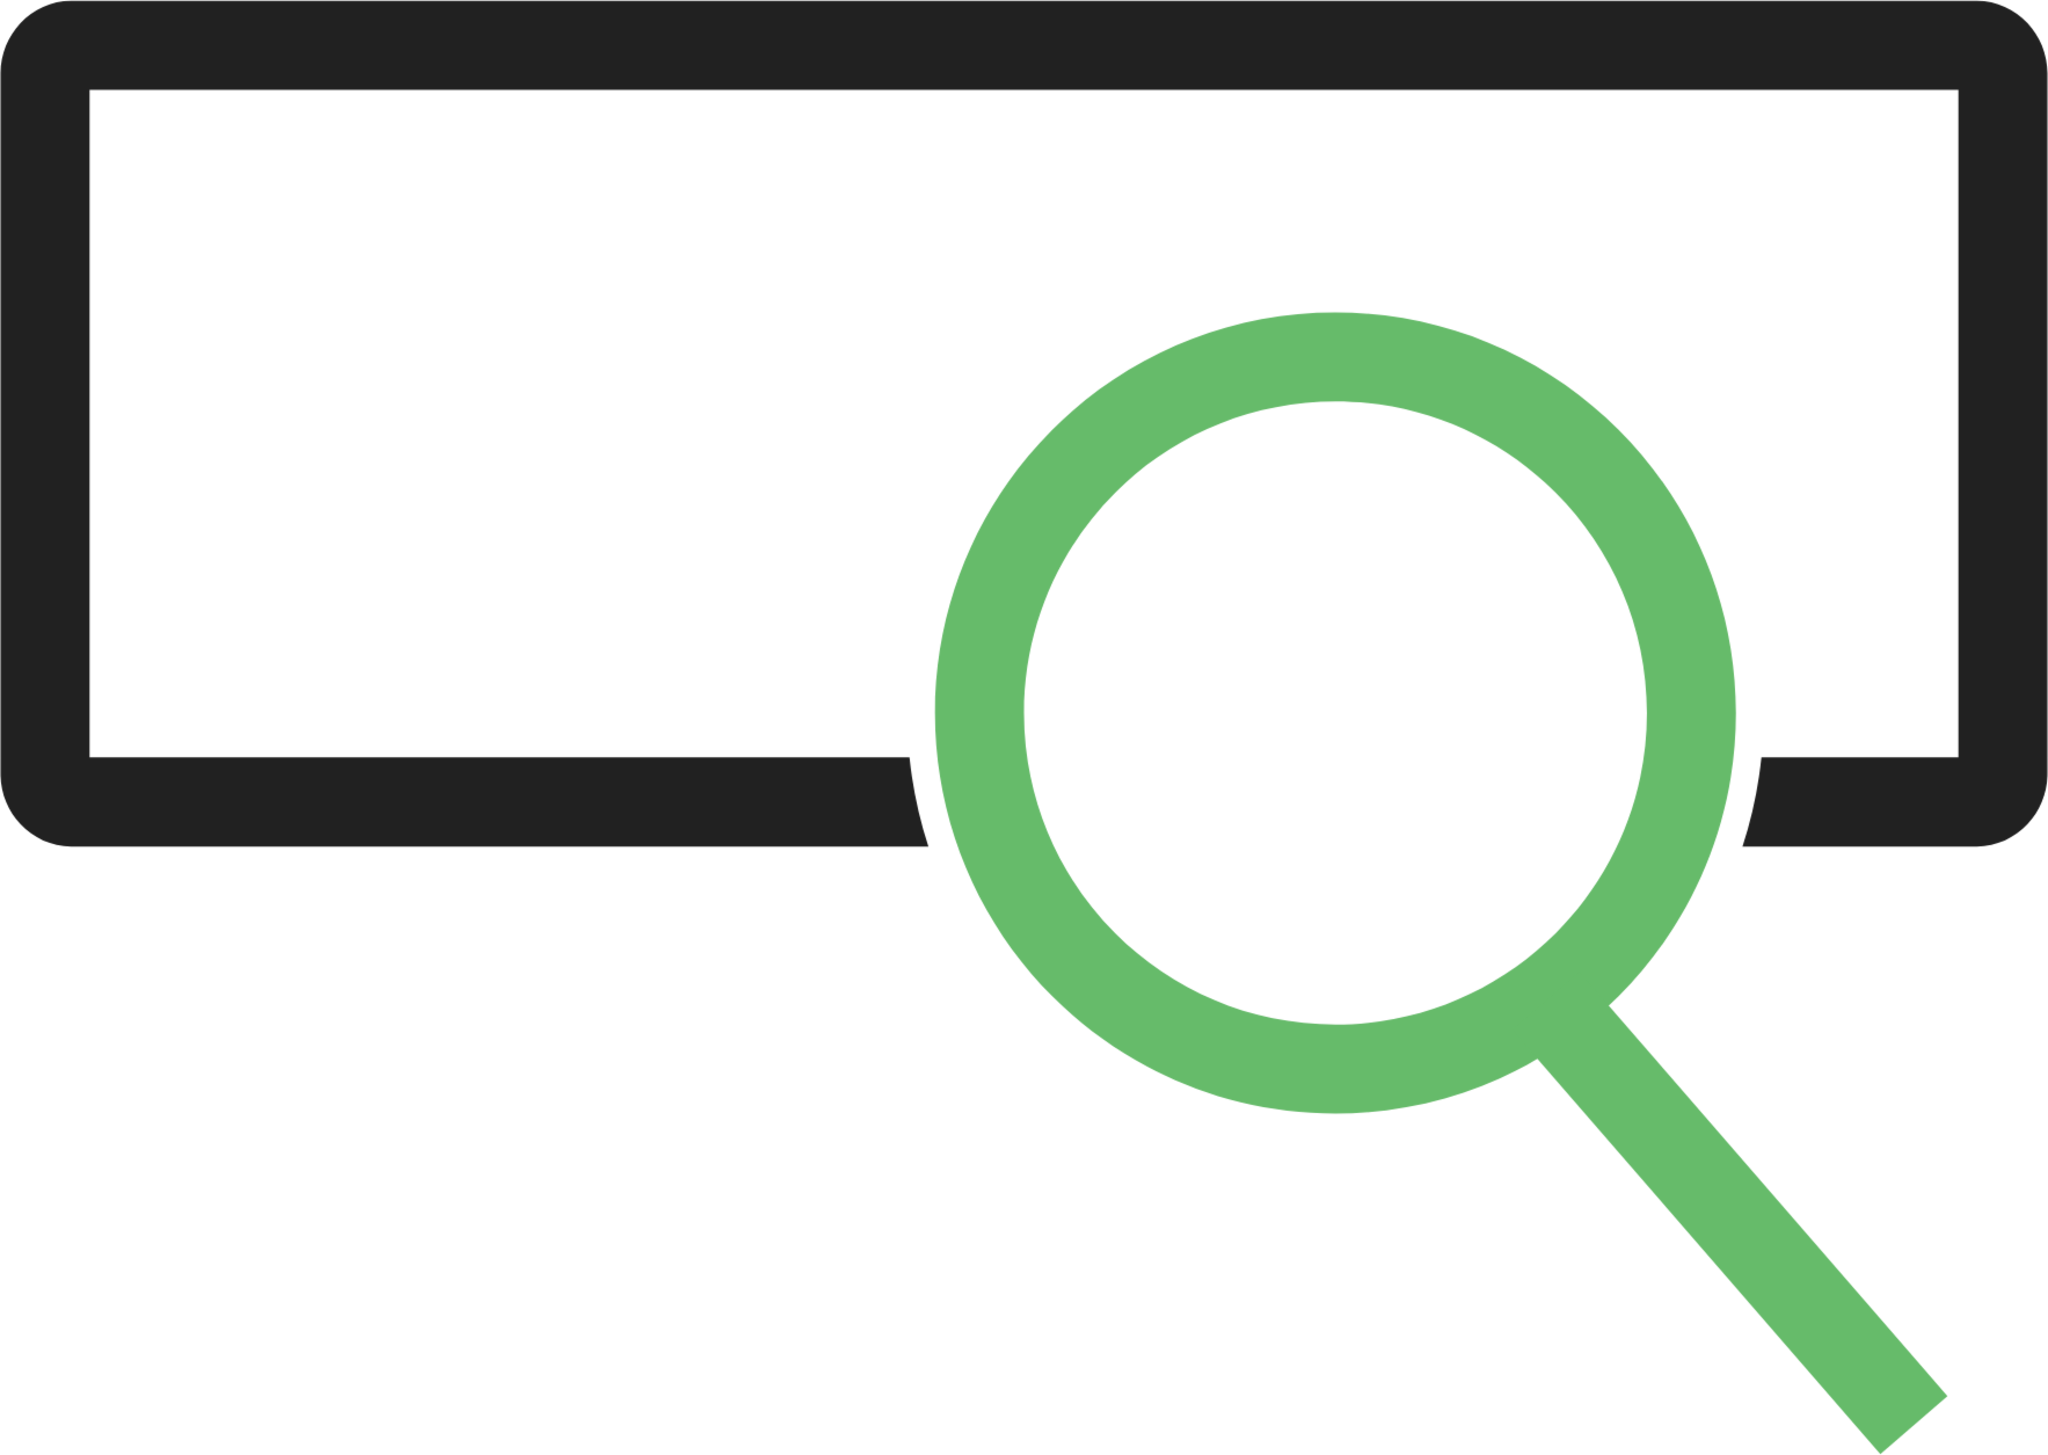 search icon png transparent green